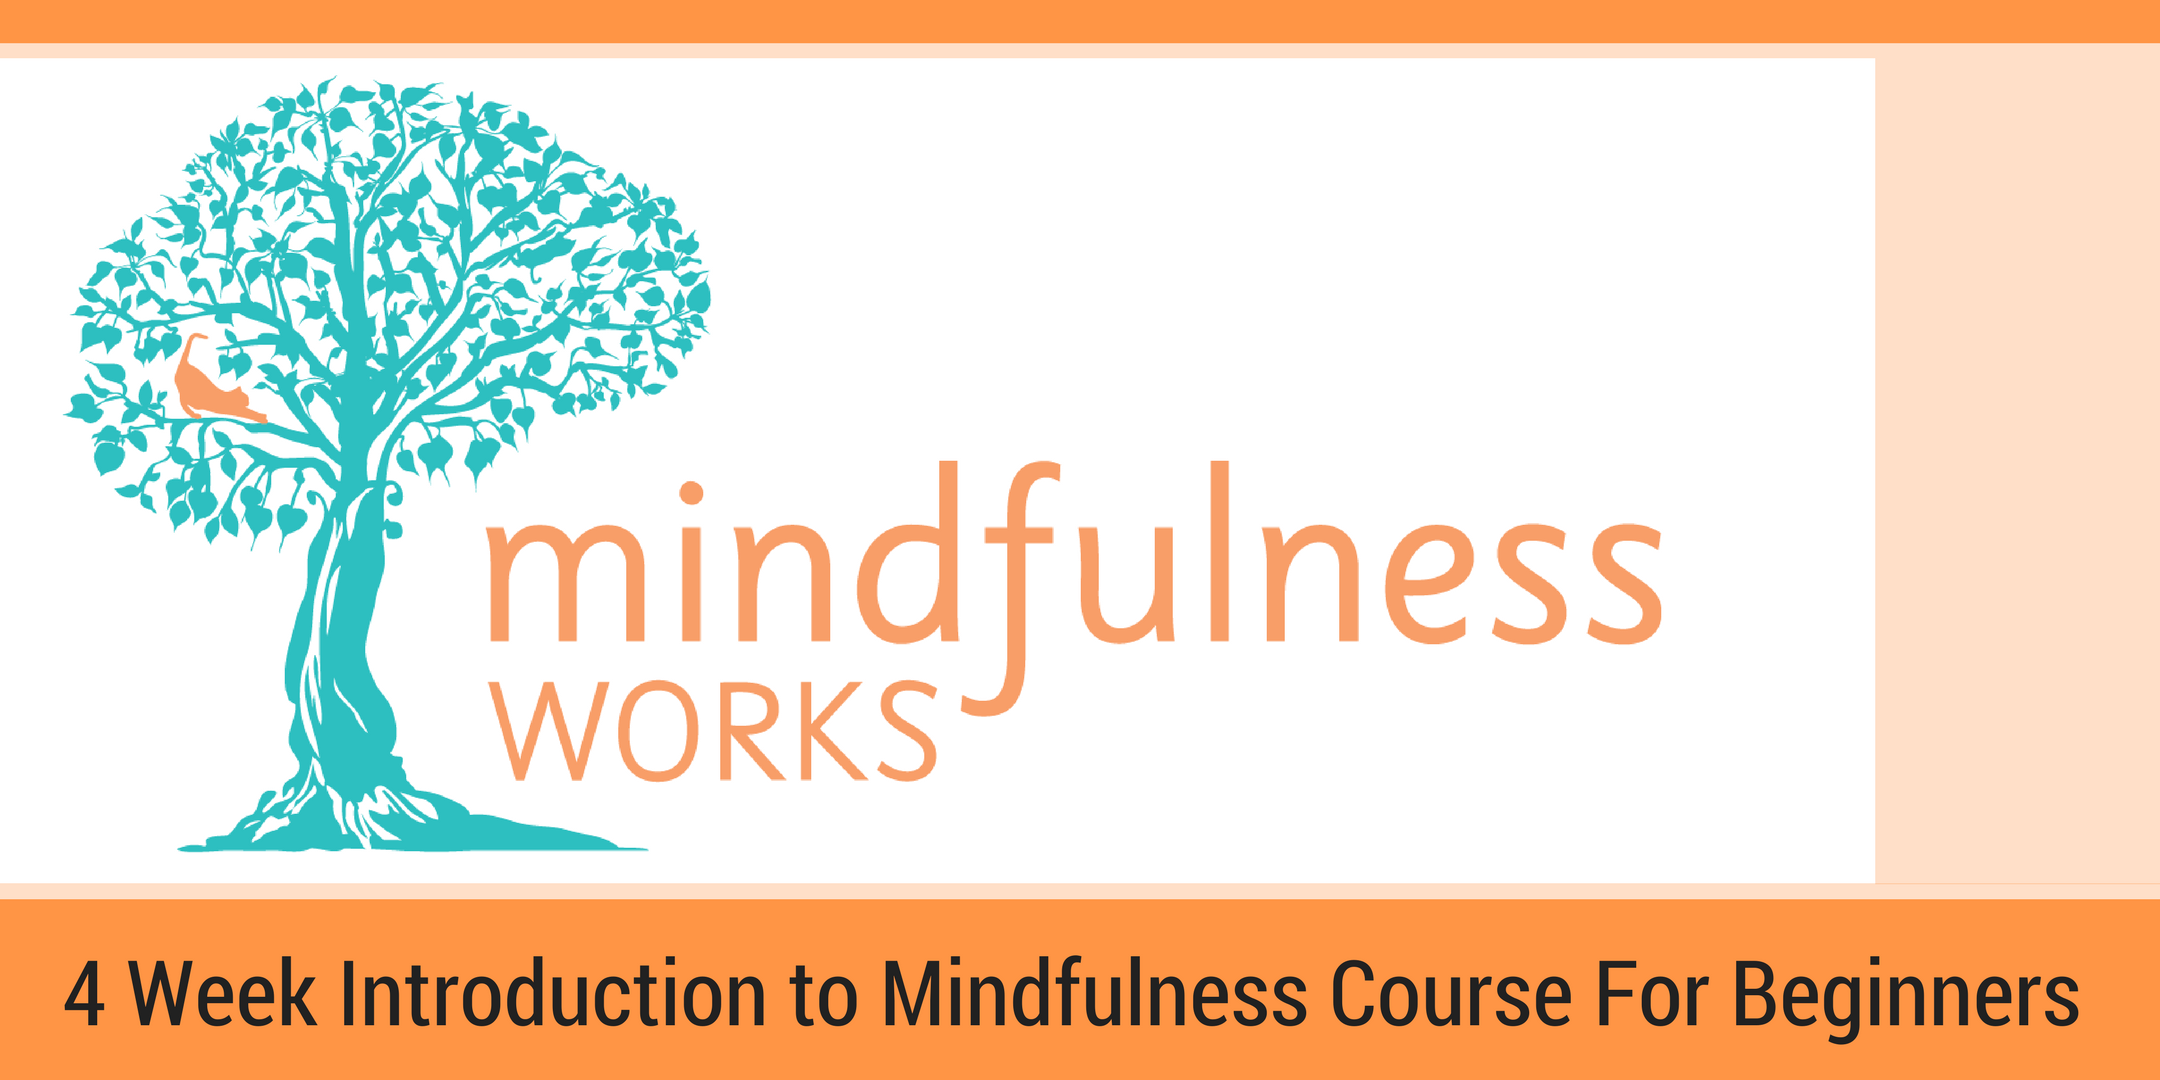 Canberra (Chifley) – An Introduction to Mindfulness & Meditation 4 Week Course